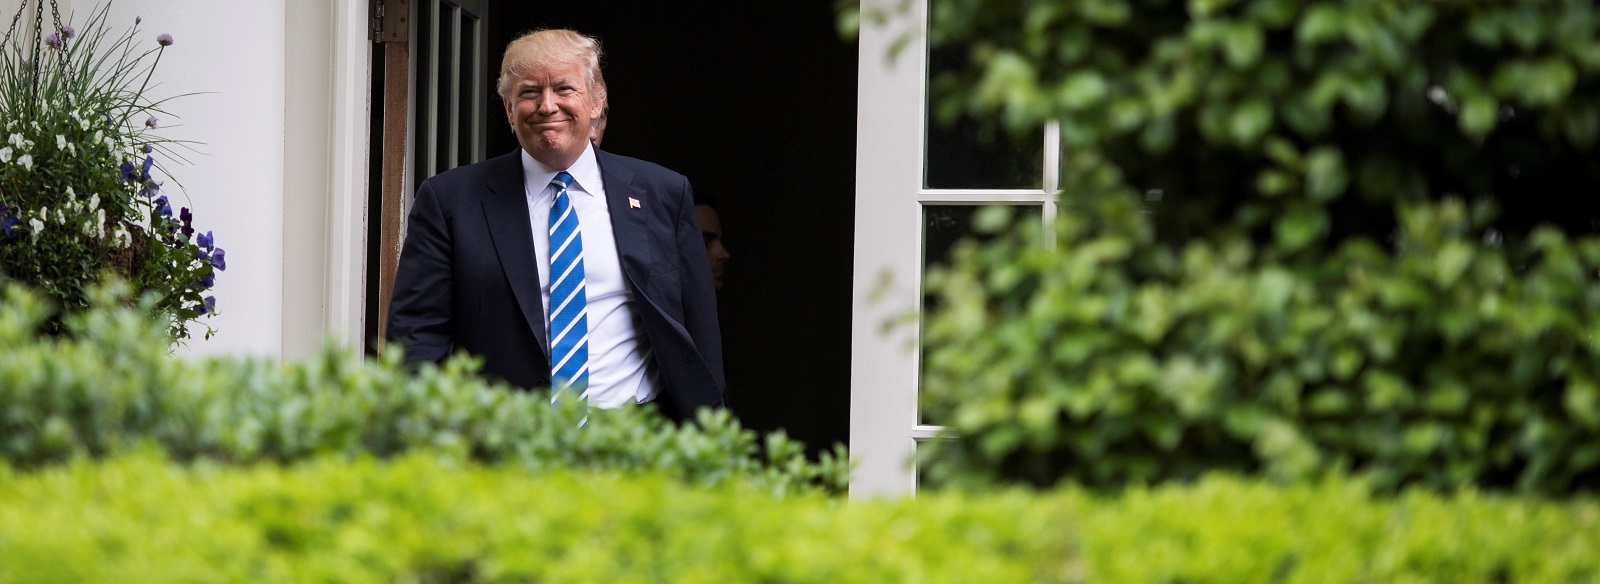 President Donald Trump in the Kennedy Garden of the White House on Monday. (Photo: Jabin Botsford via Getty Images)